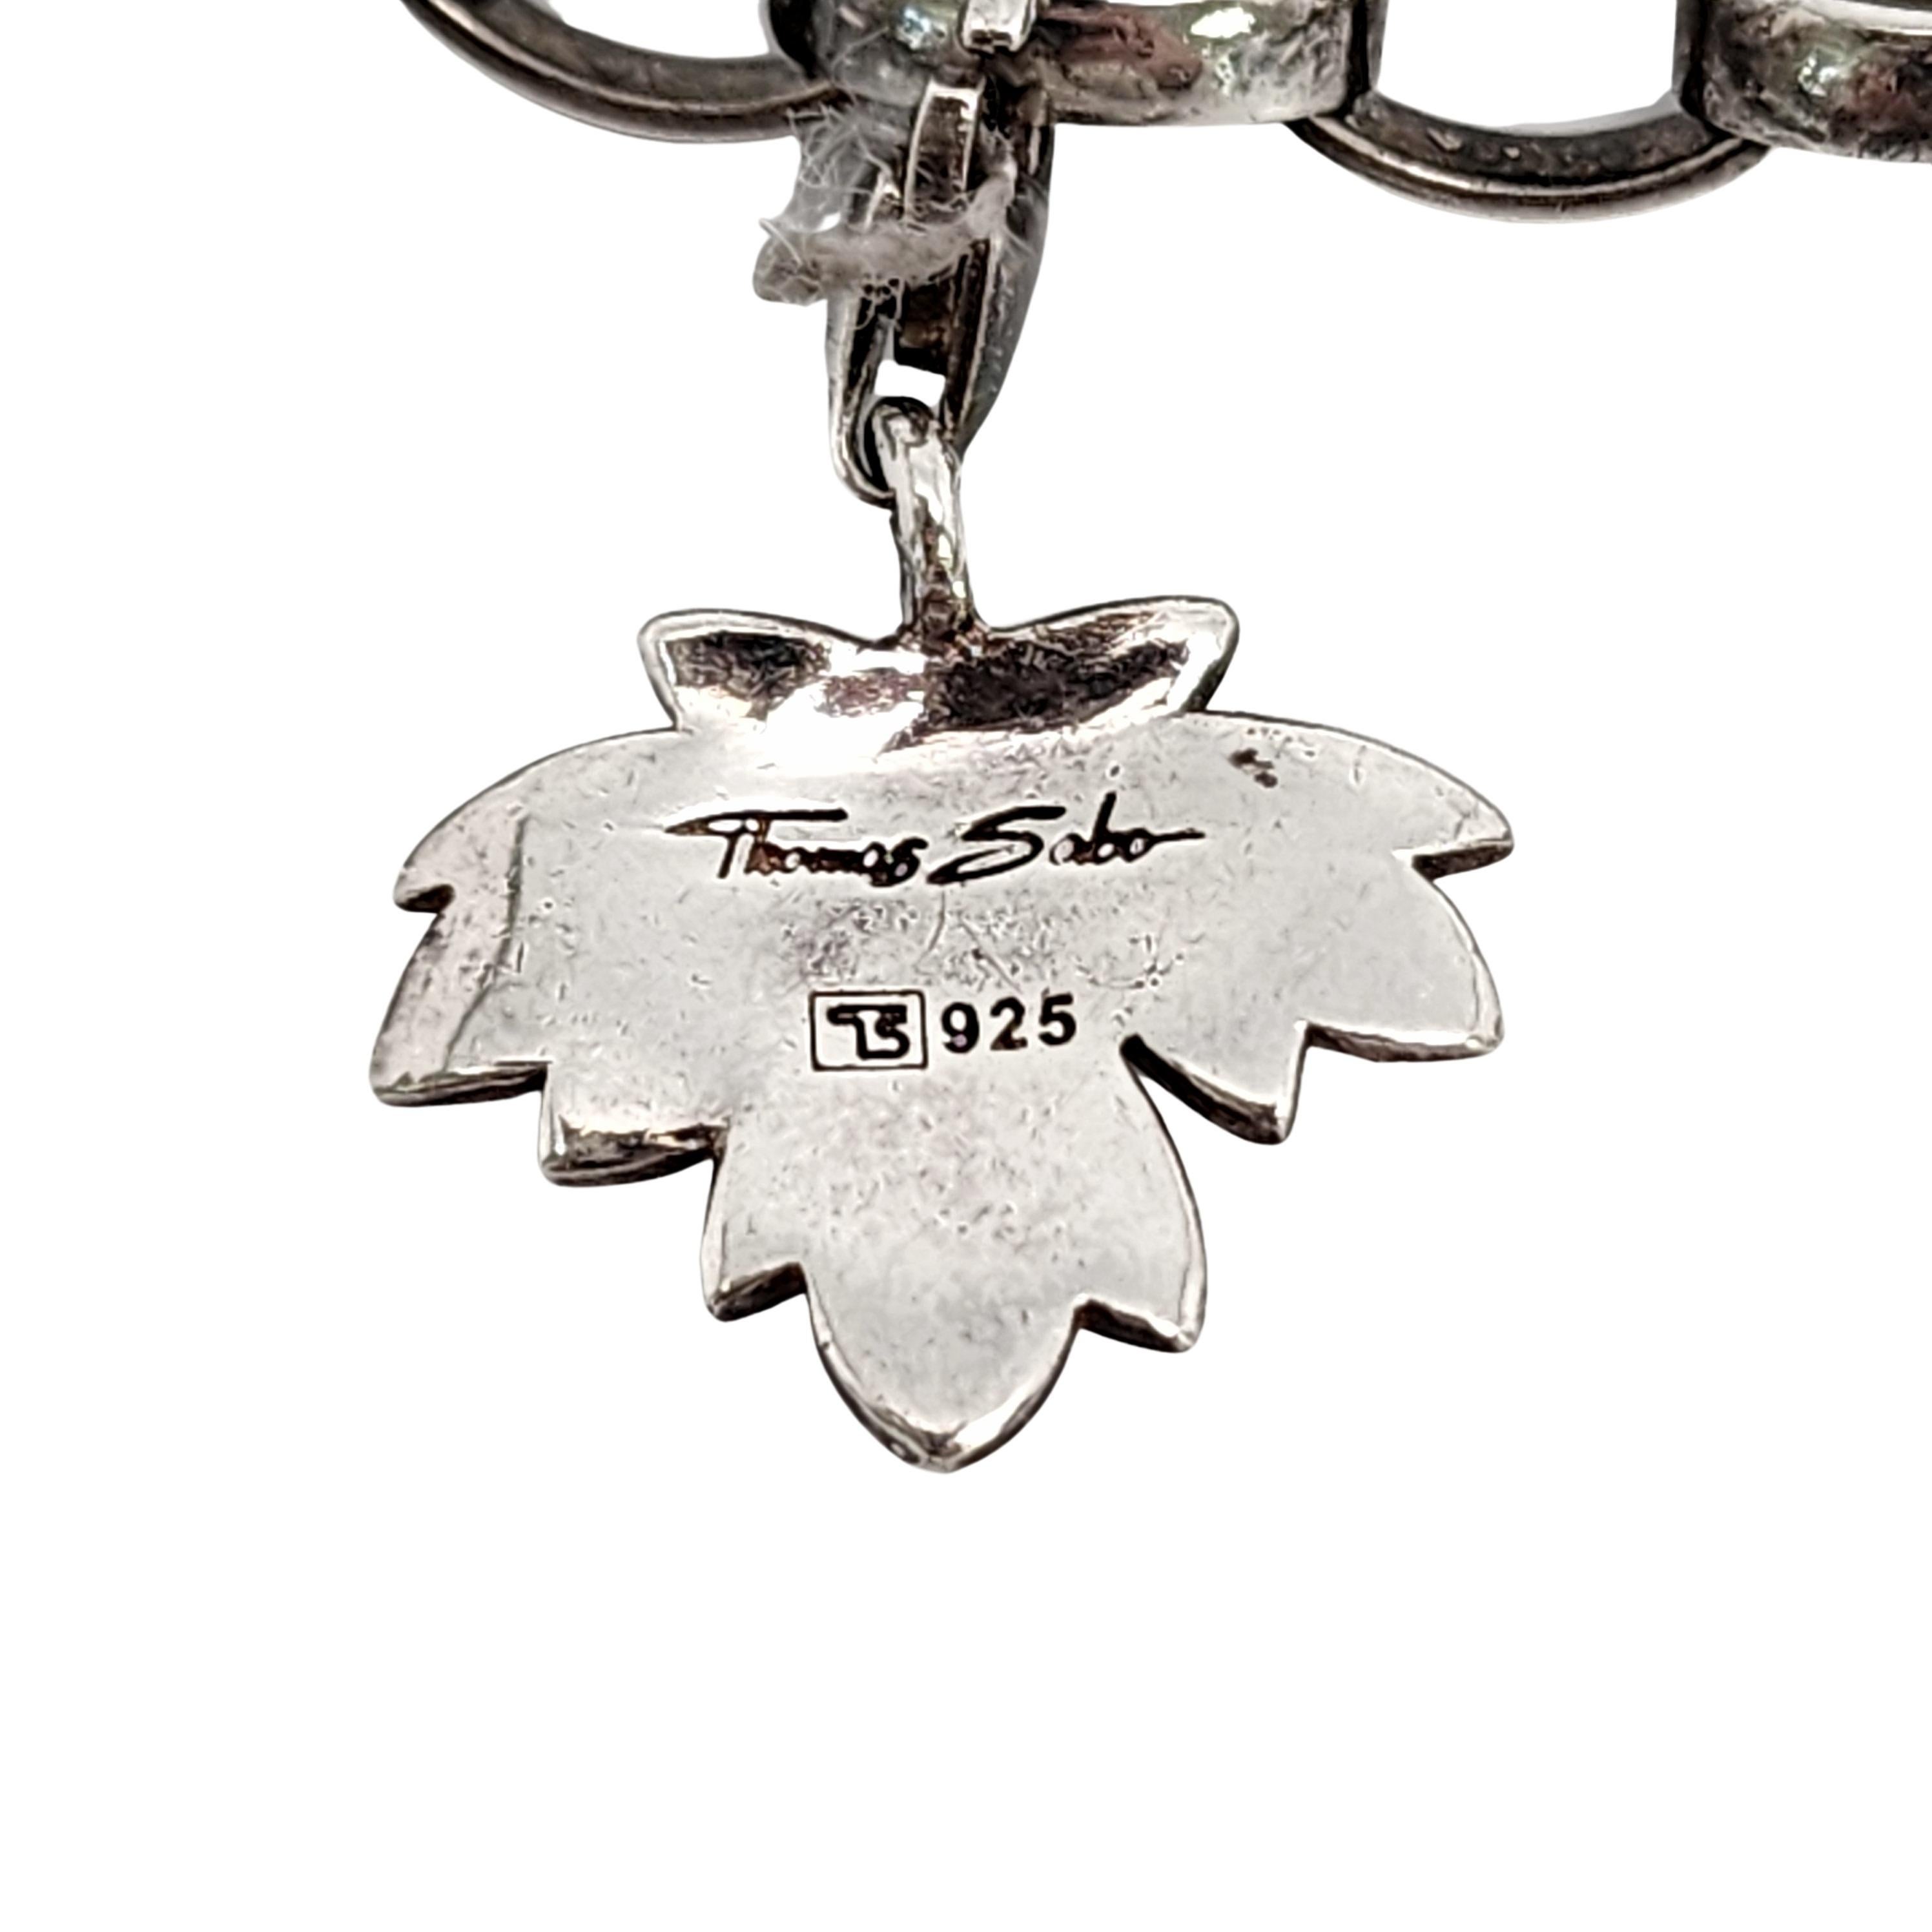 Thomas Sabo Charm Club SS Bracelet with Soccer Ball and Leaf Charms #14459 For Sale 3